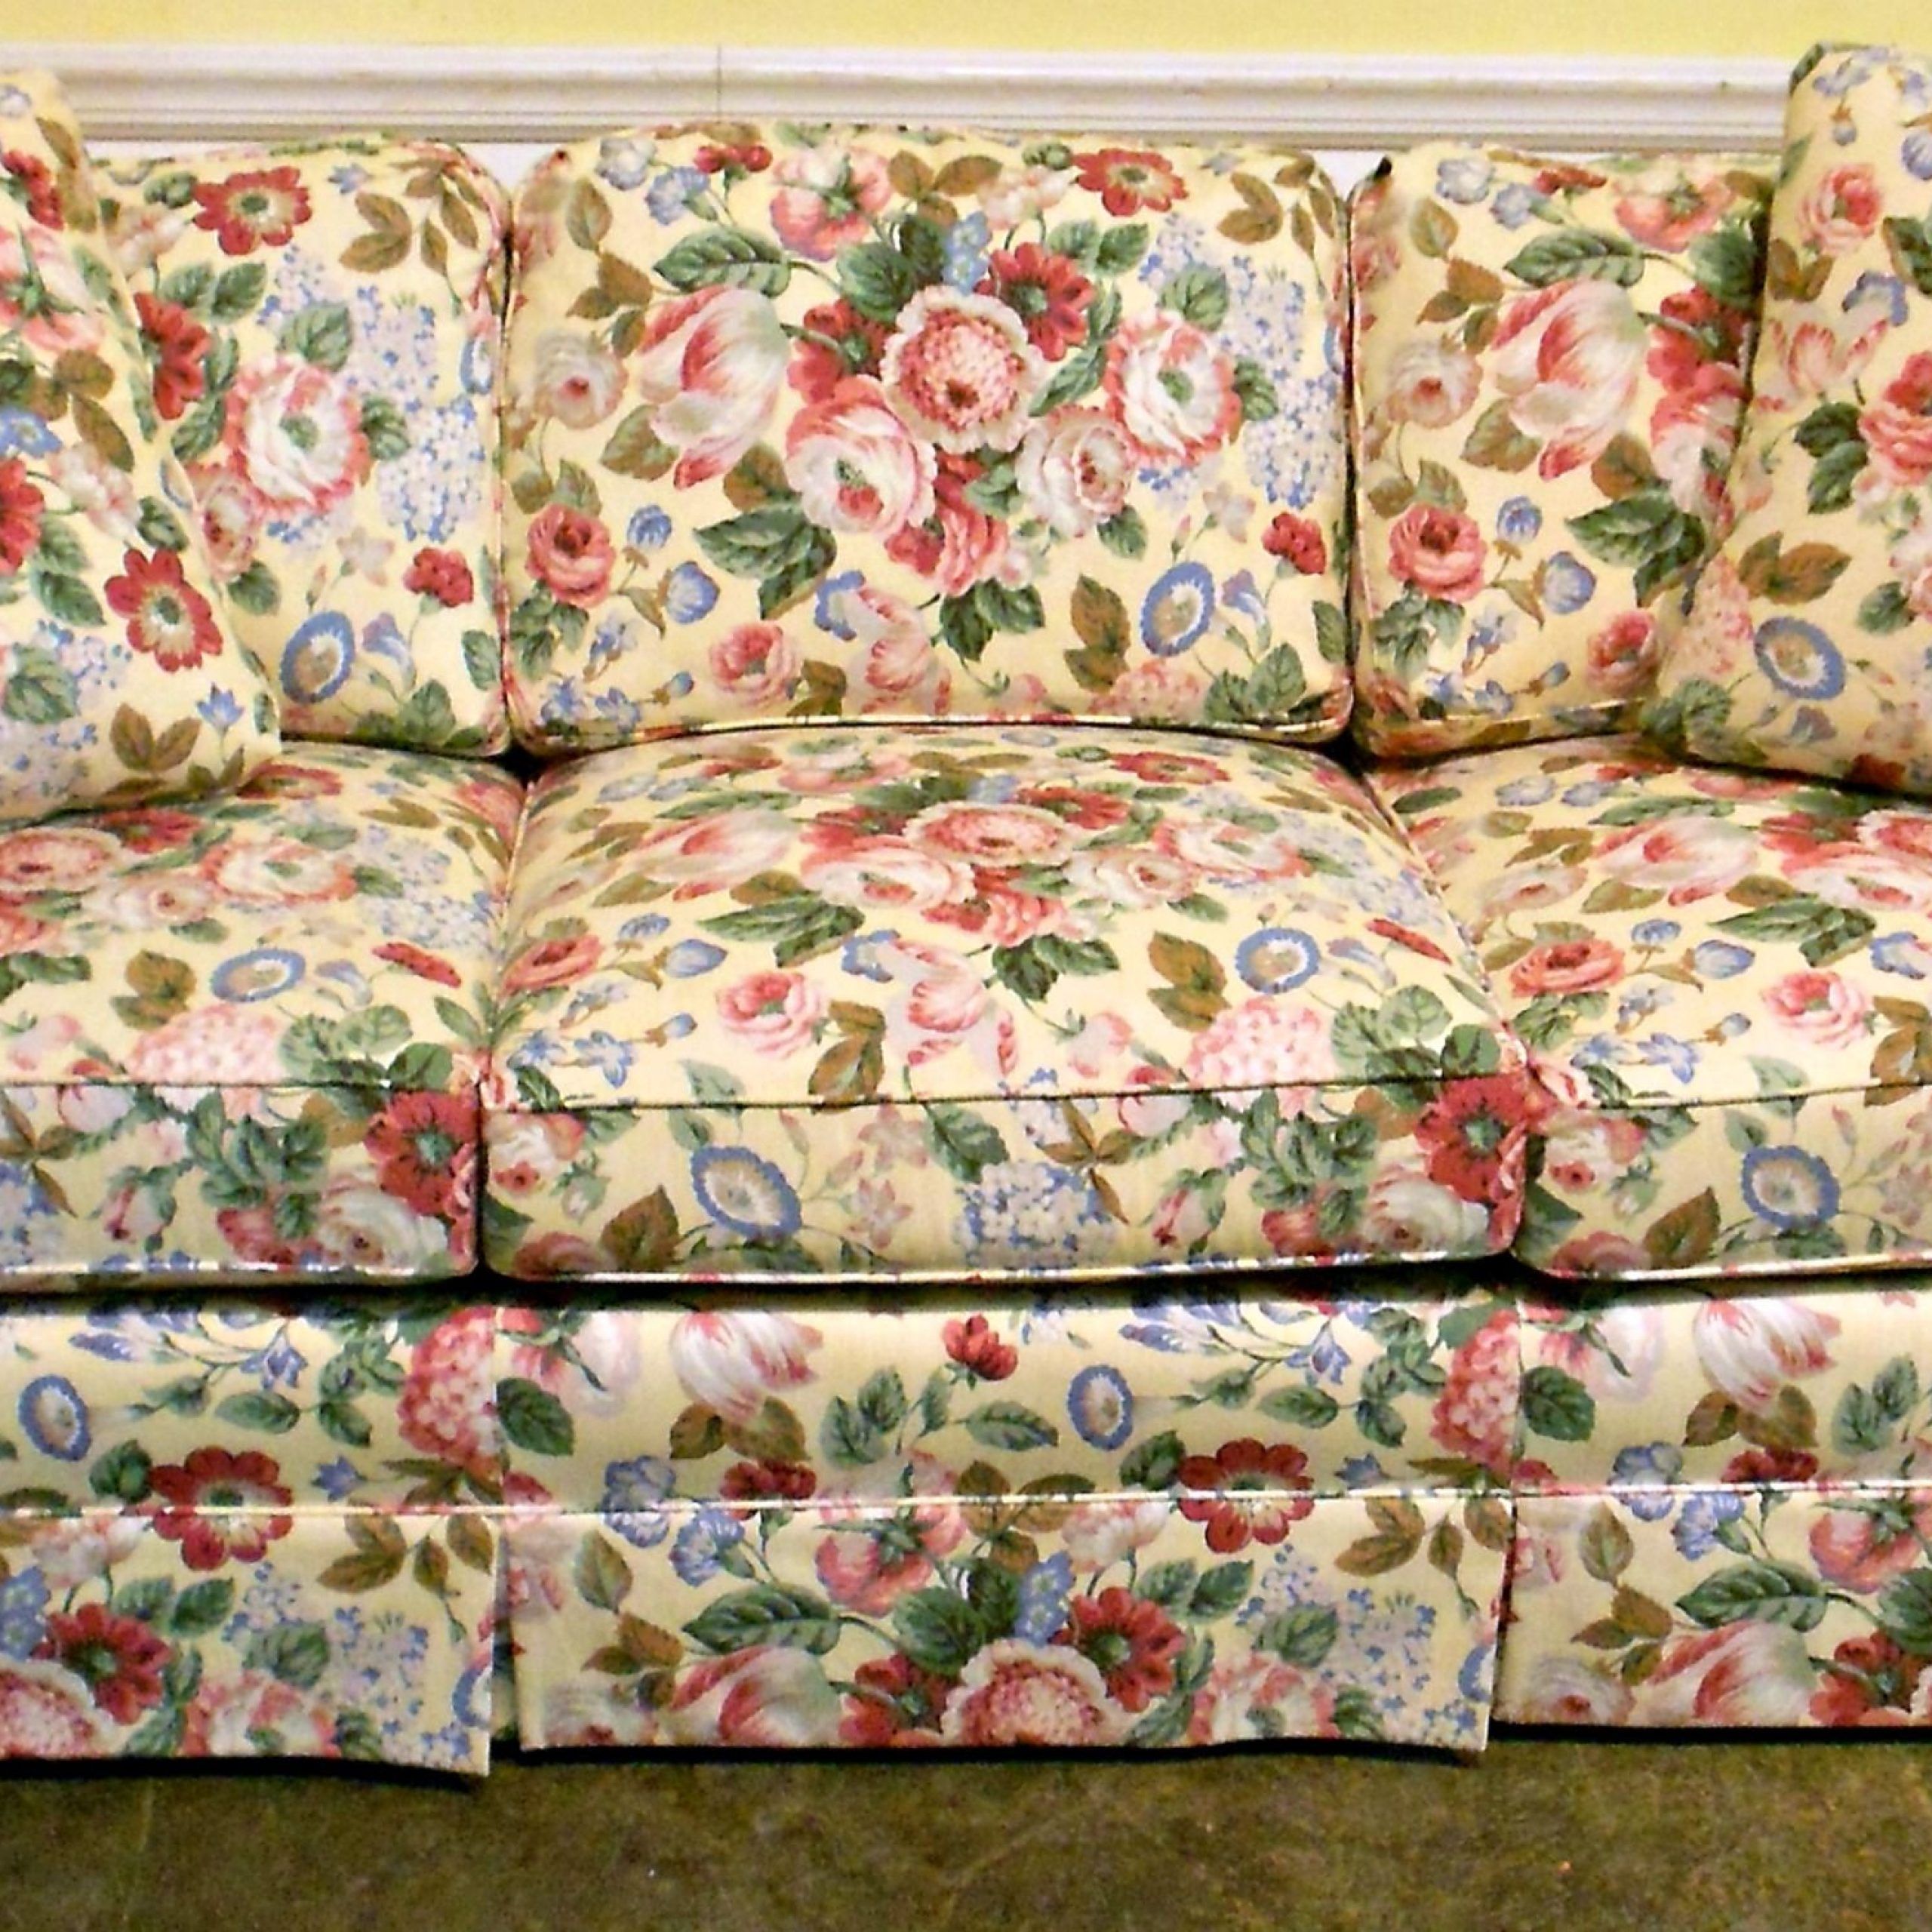 Flowered Sofas | Printed Fabric Sofa, Printed Sofa, Fabric Sofa For Sofas In Pattern (View 9 of 20)